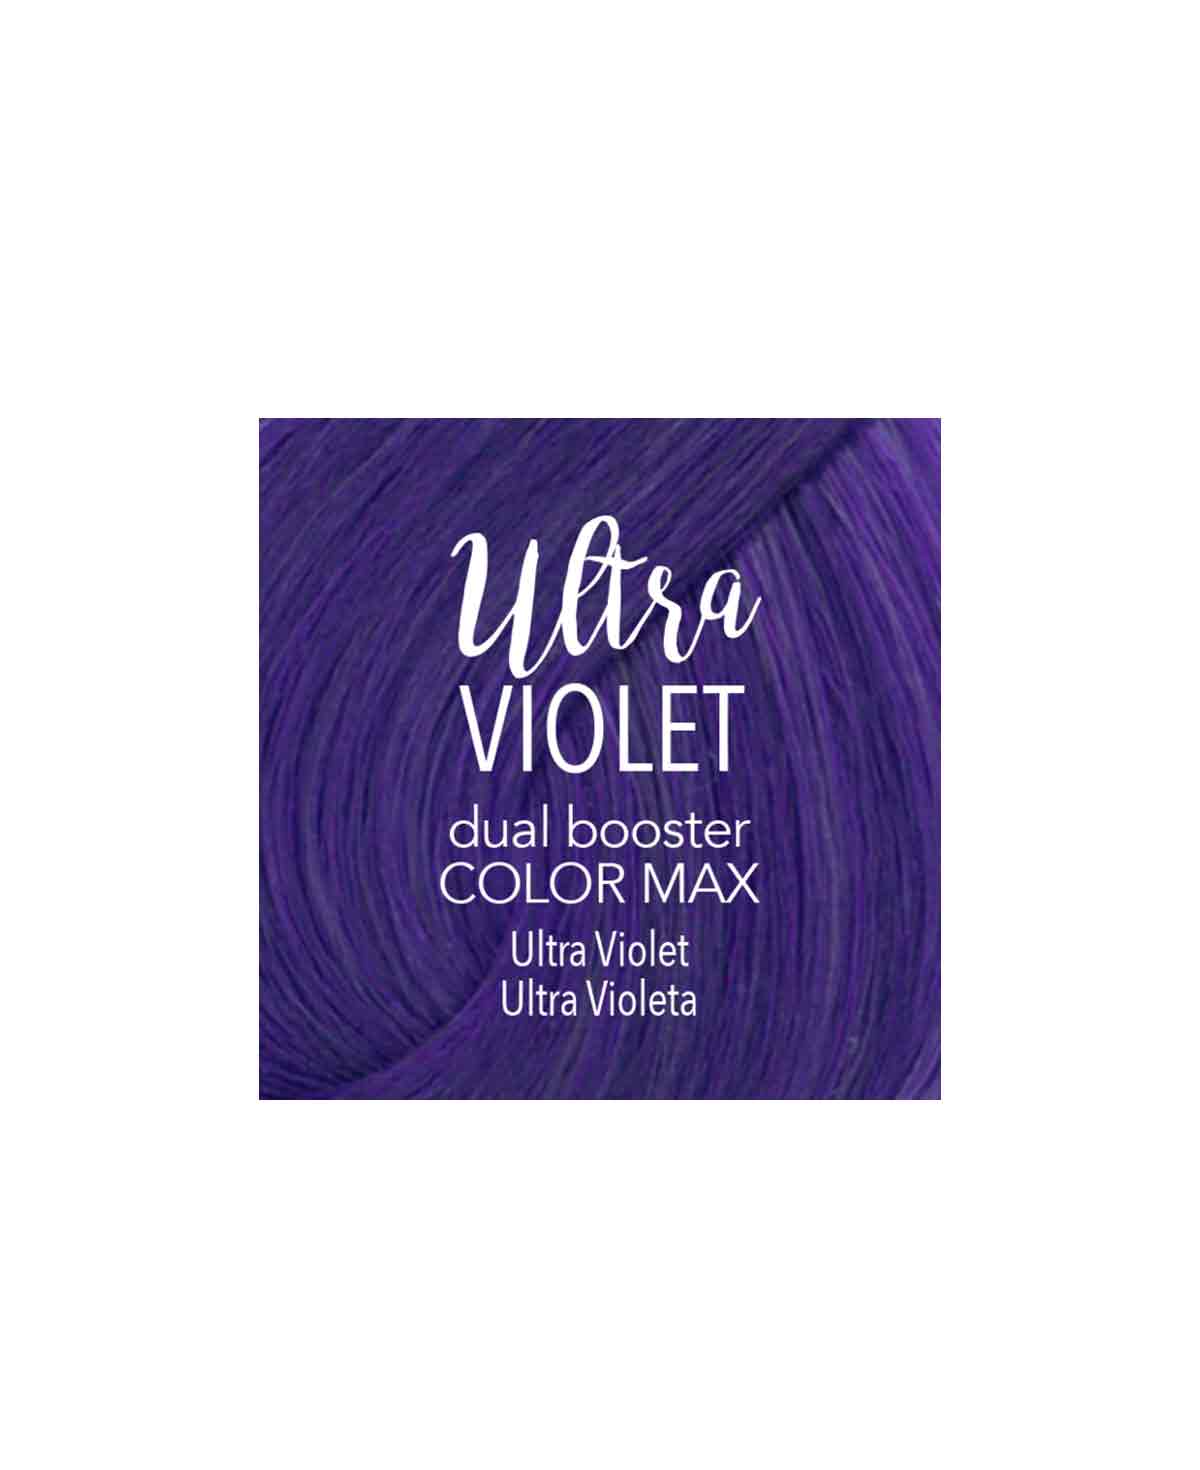 Mydentity - Dual Booster Ultra Violet 58g